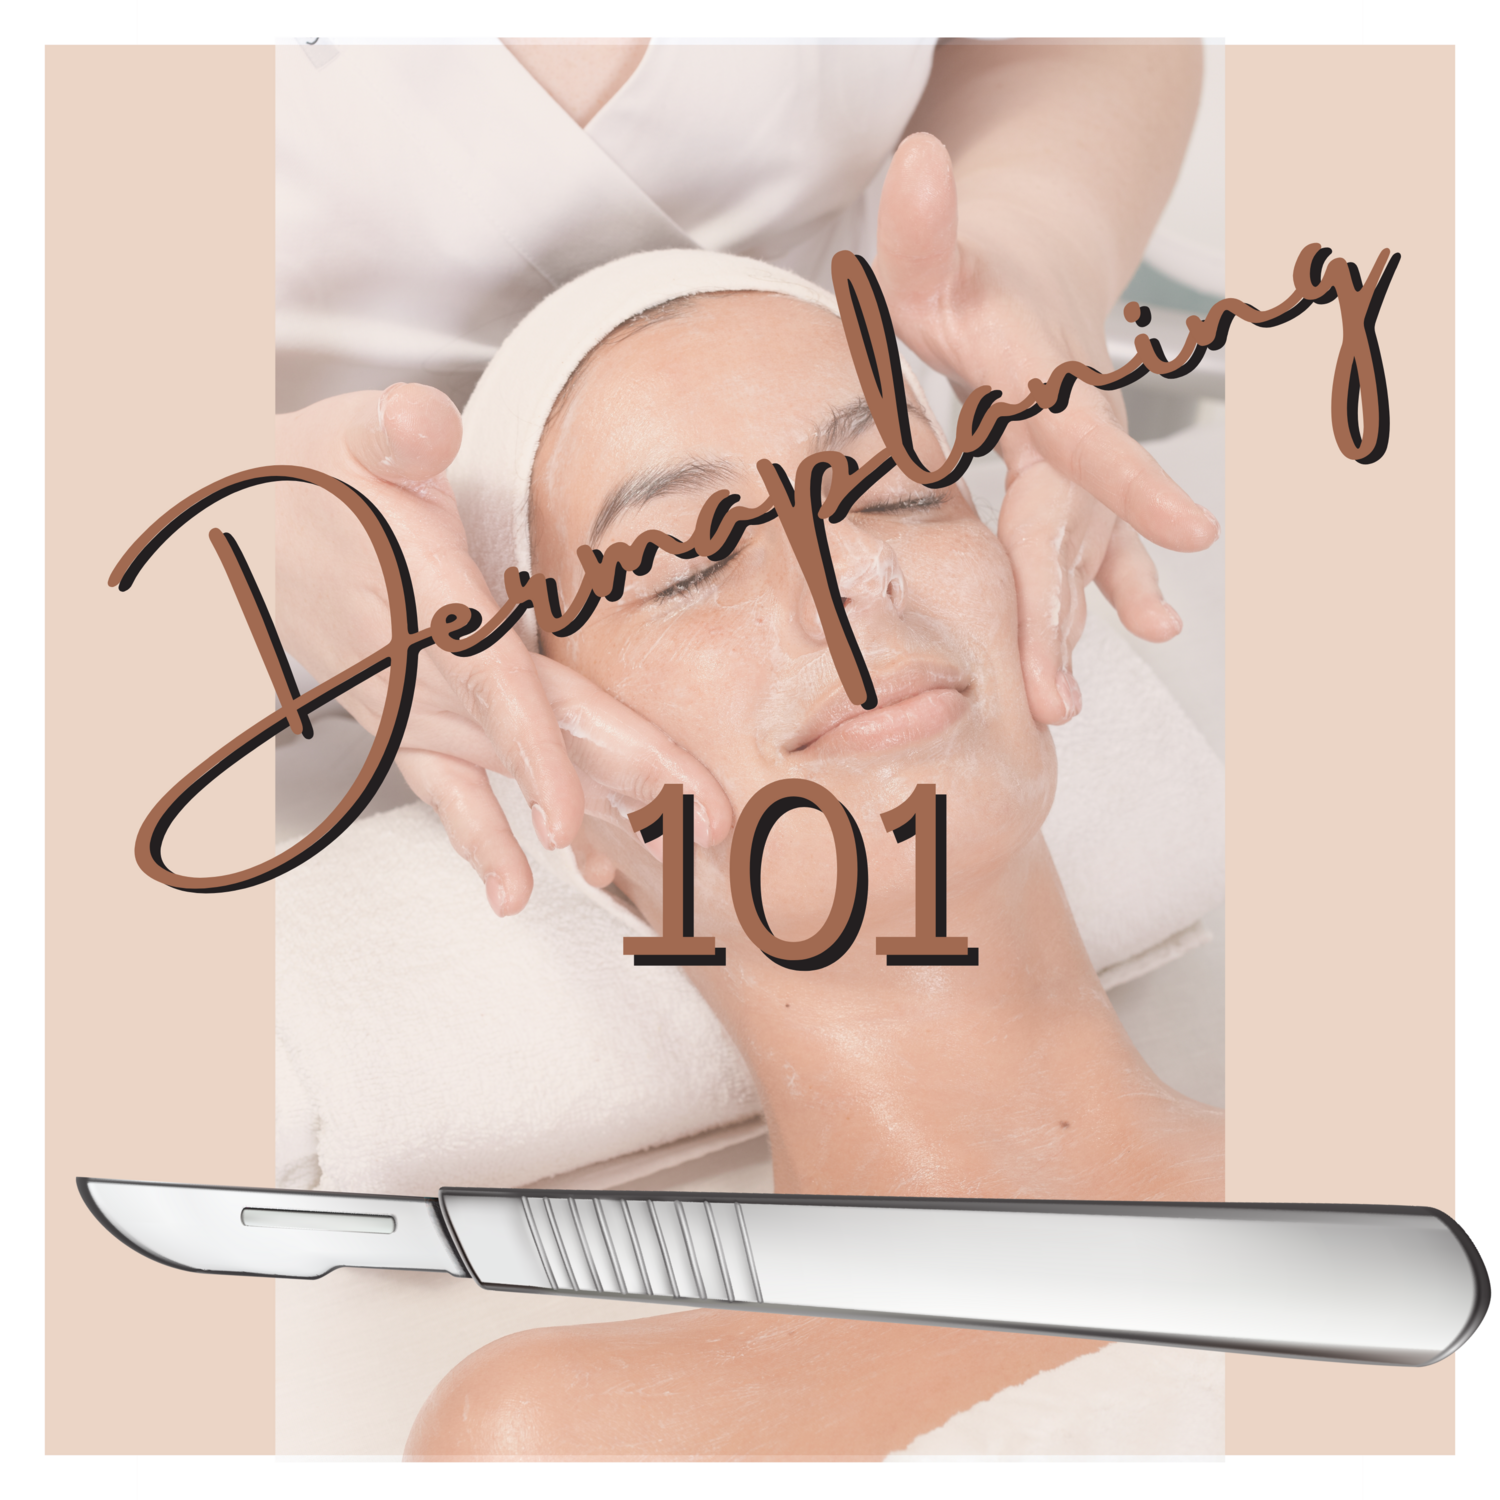 Hands on Training for Dermaplaning October 3rd